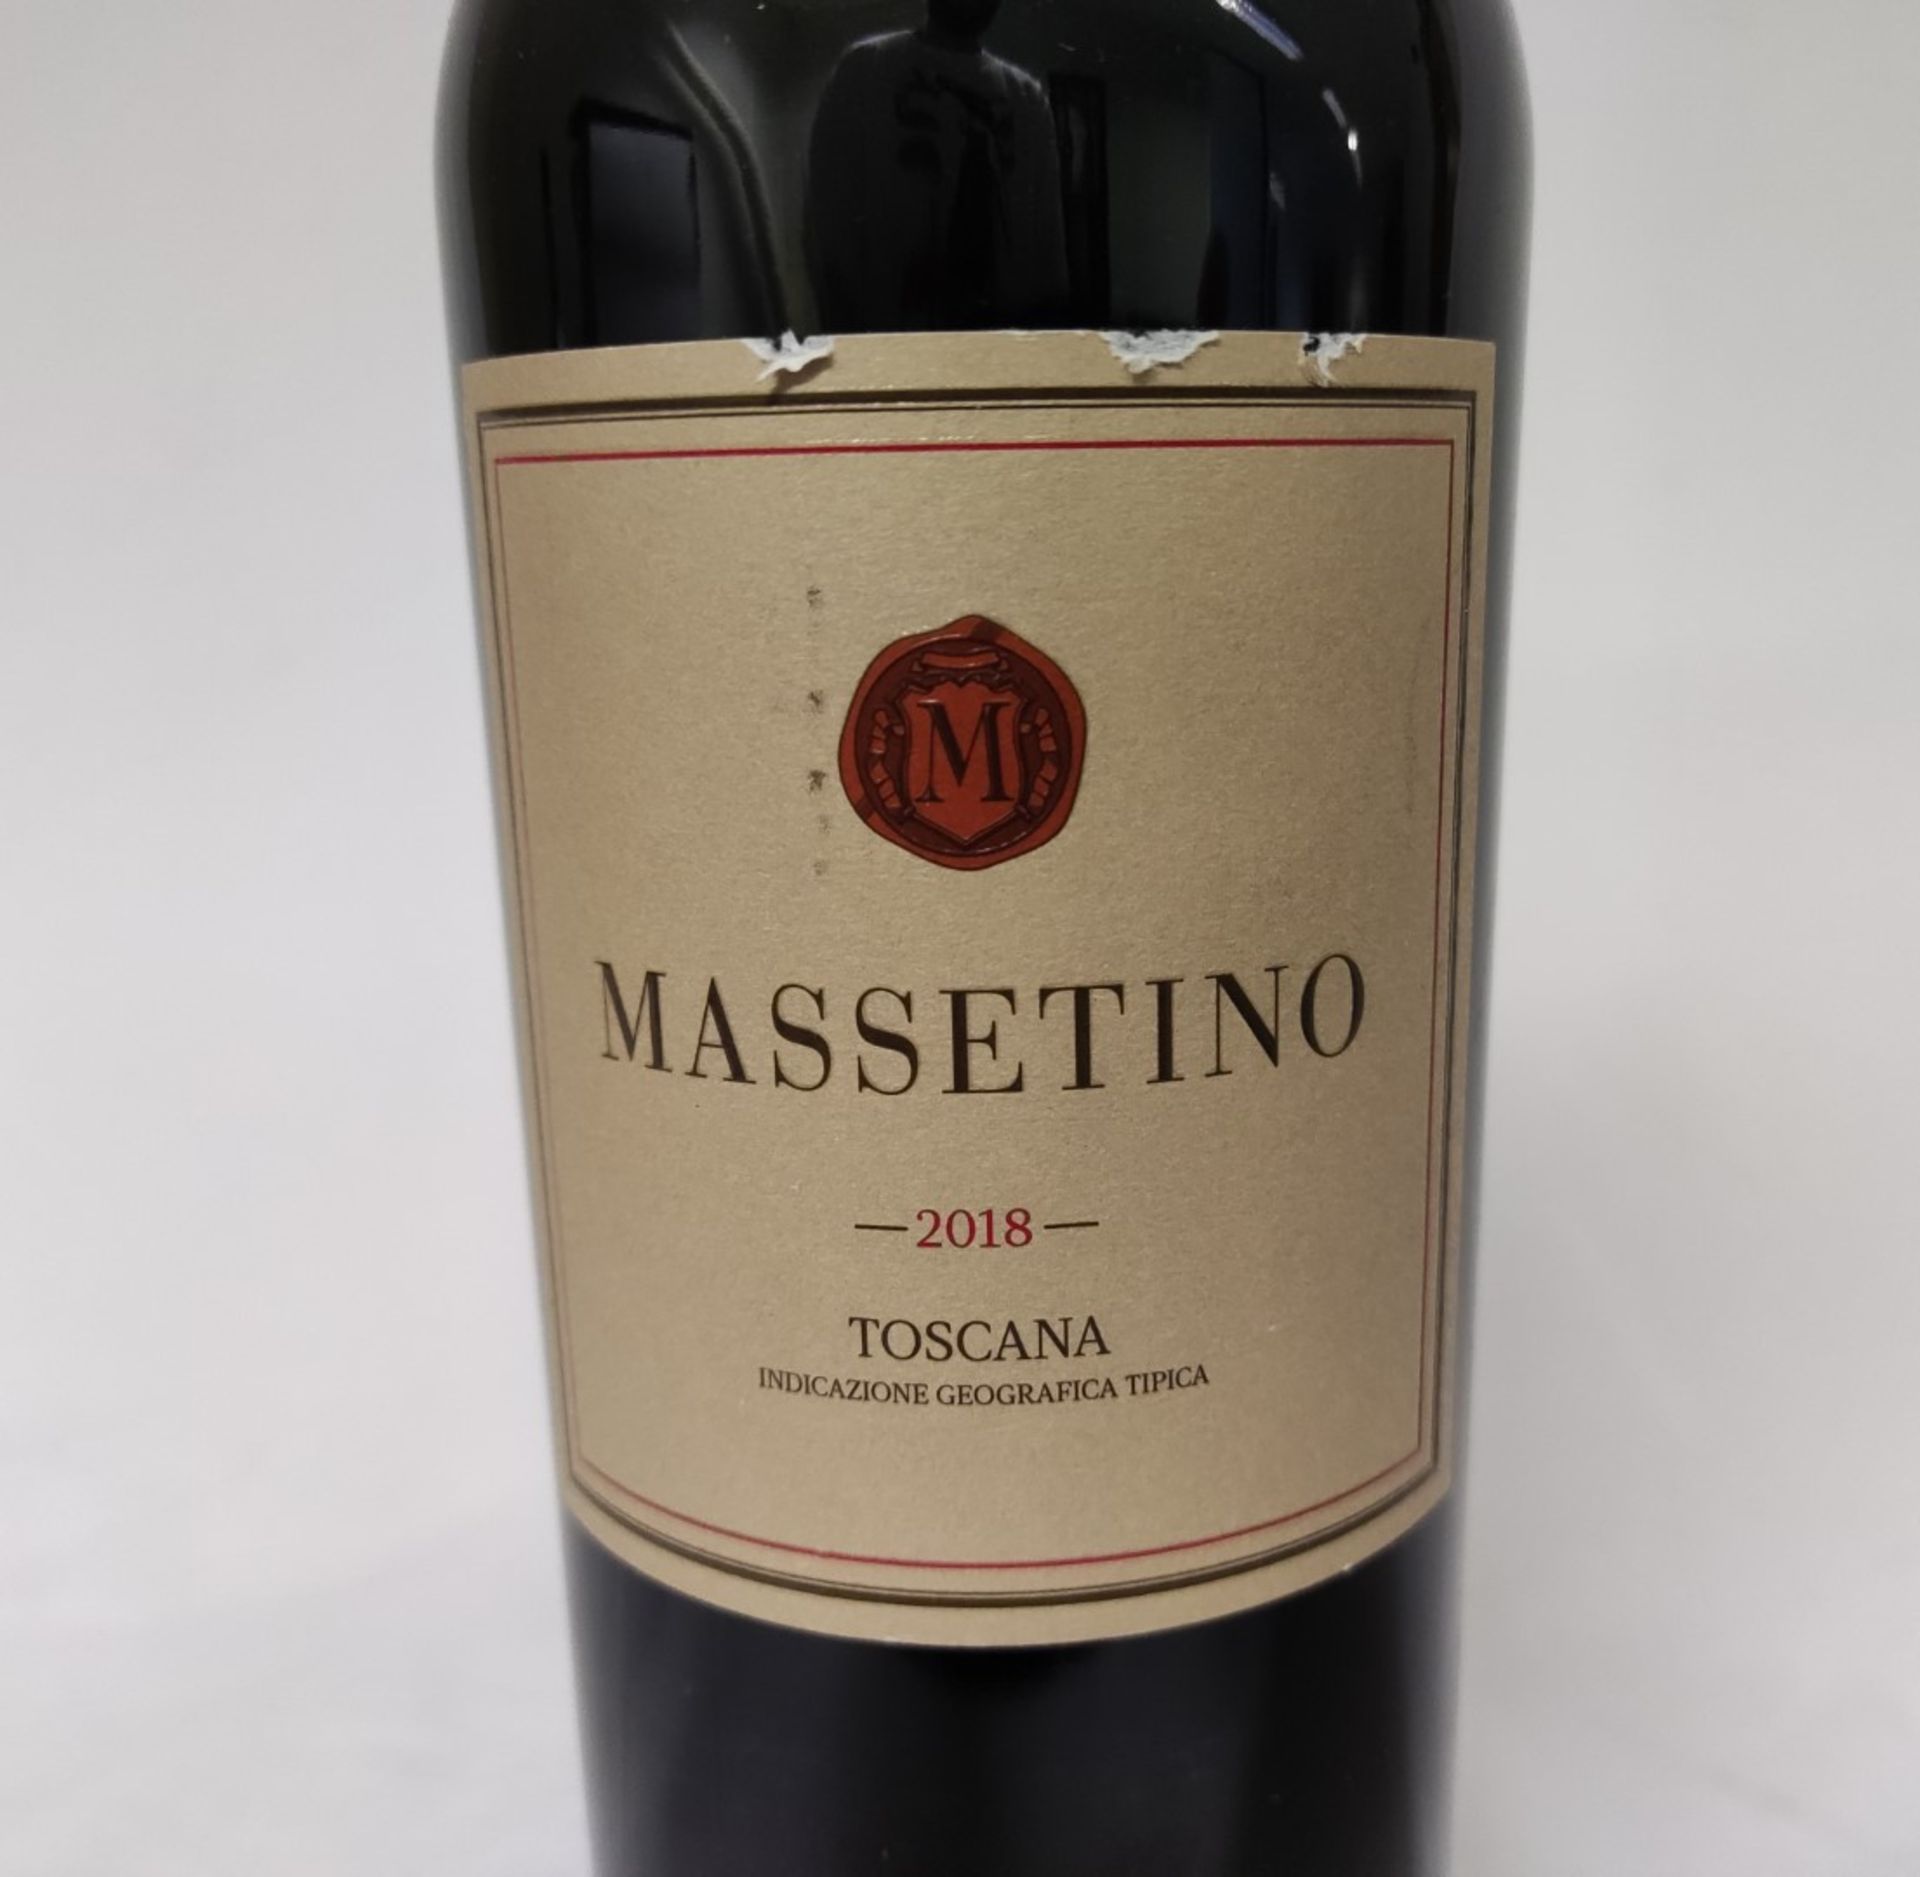 1 x Bottle of 2018 Massetino Toscana IGT Red Wine, Tuscany, Italy - Retail Price £375 - Ref: WAS315/ - Image 2 of 6